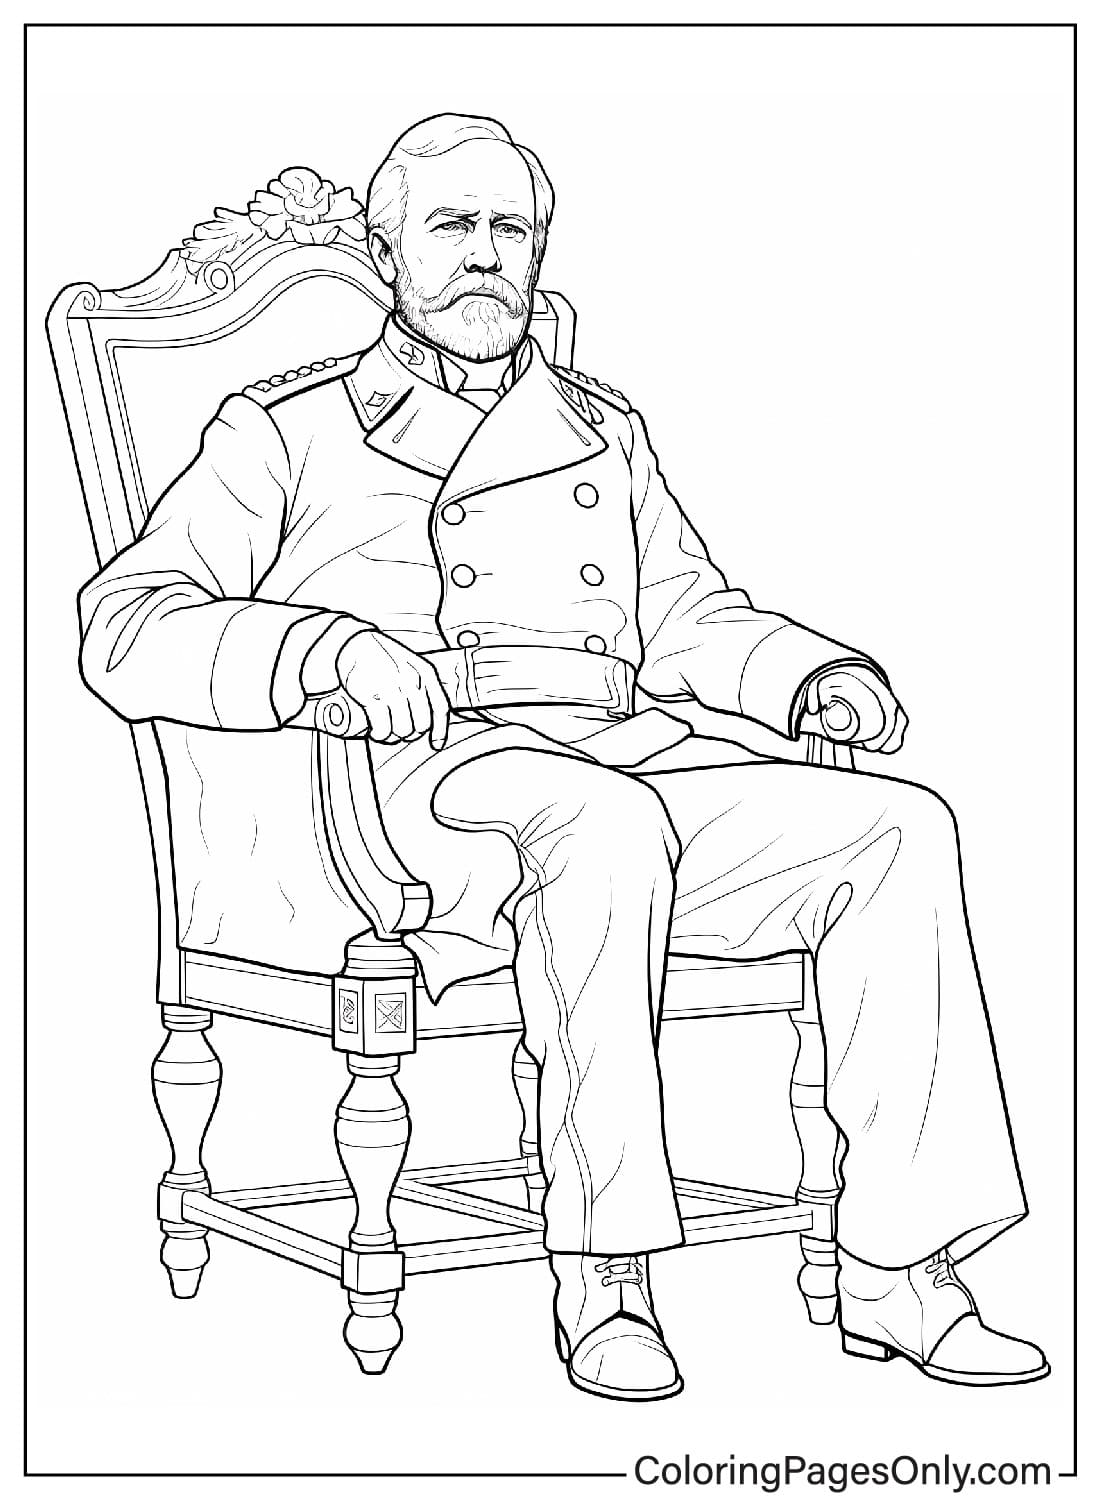 Drawing robert e lee coloring page